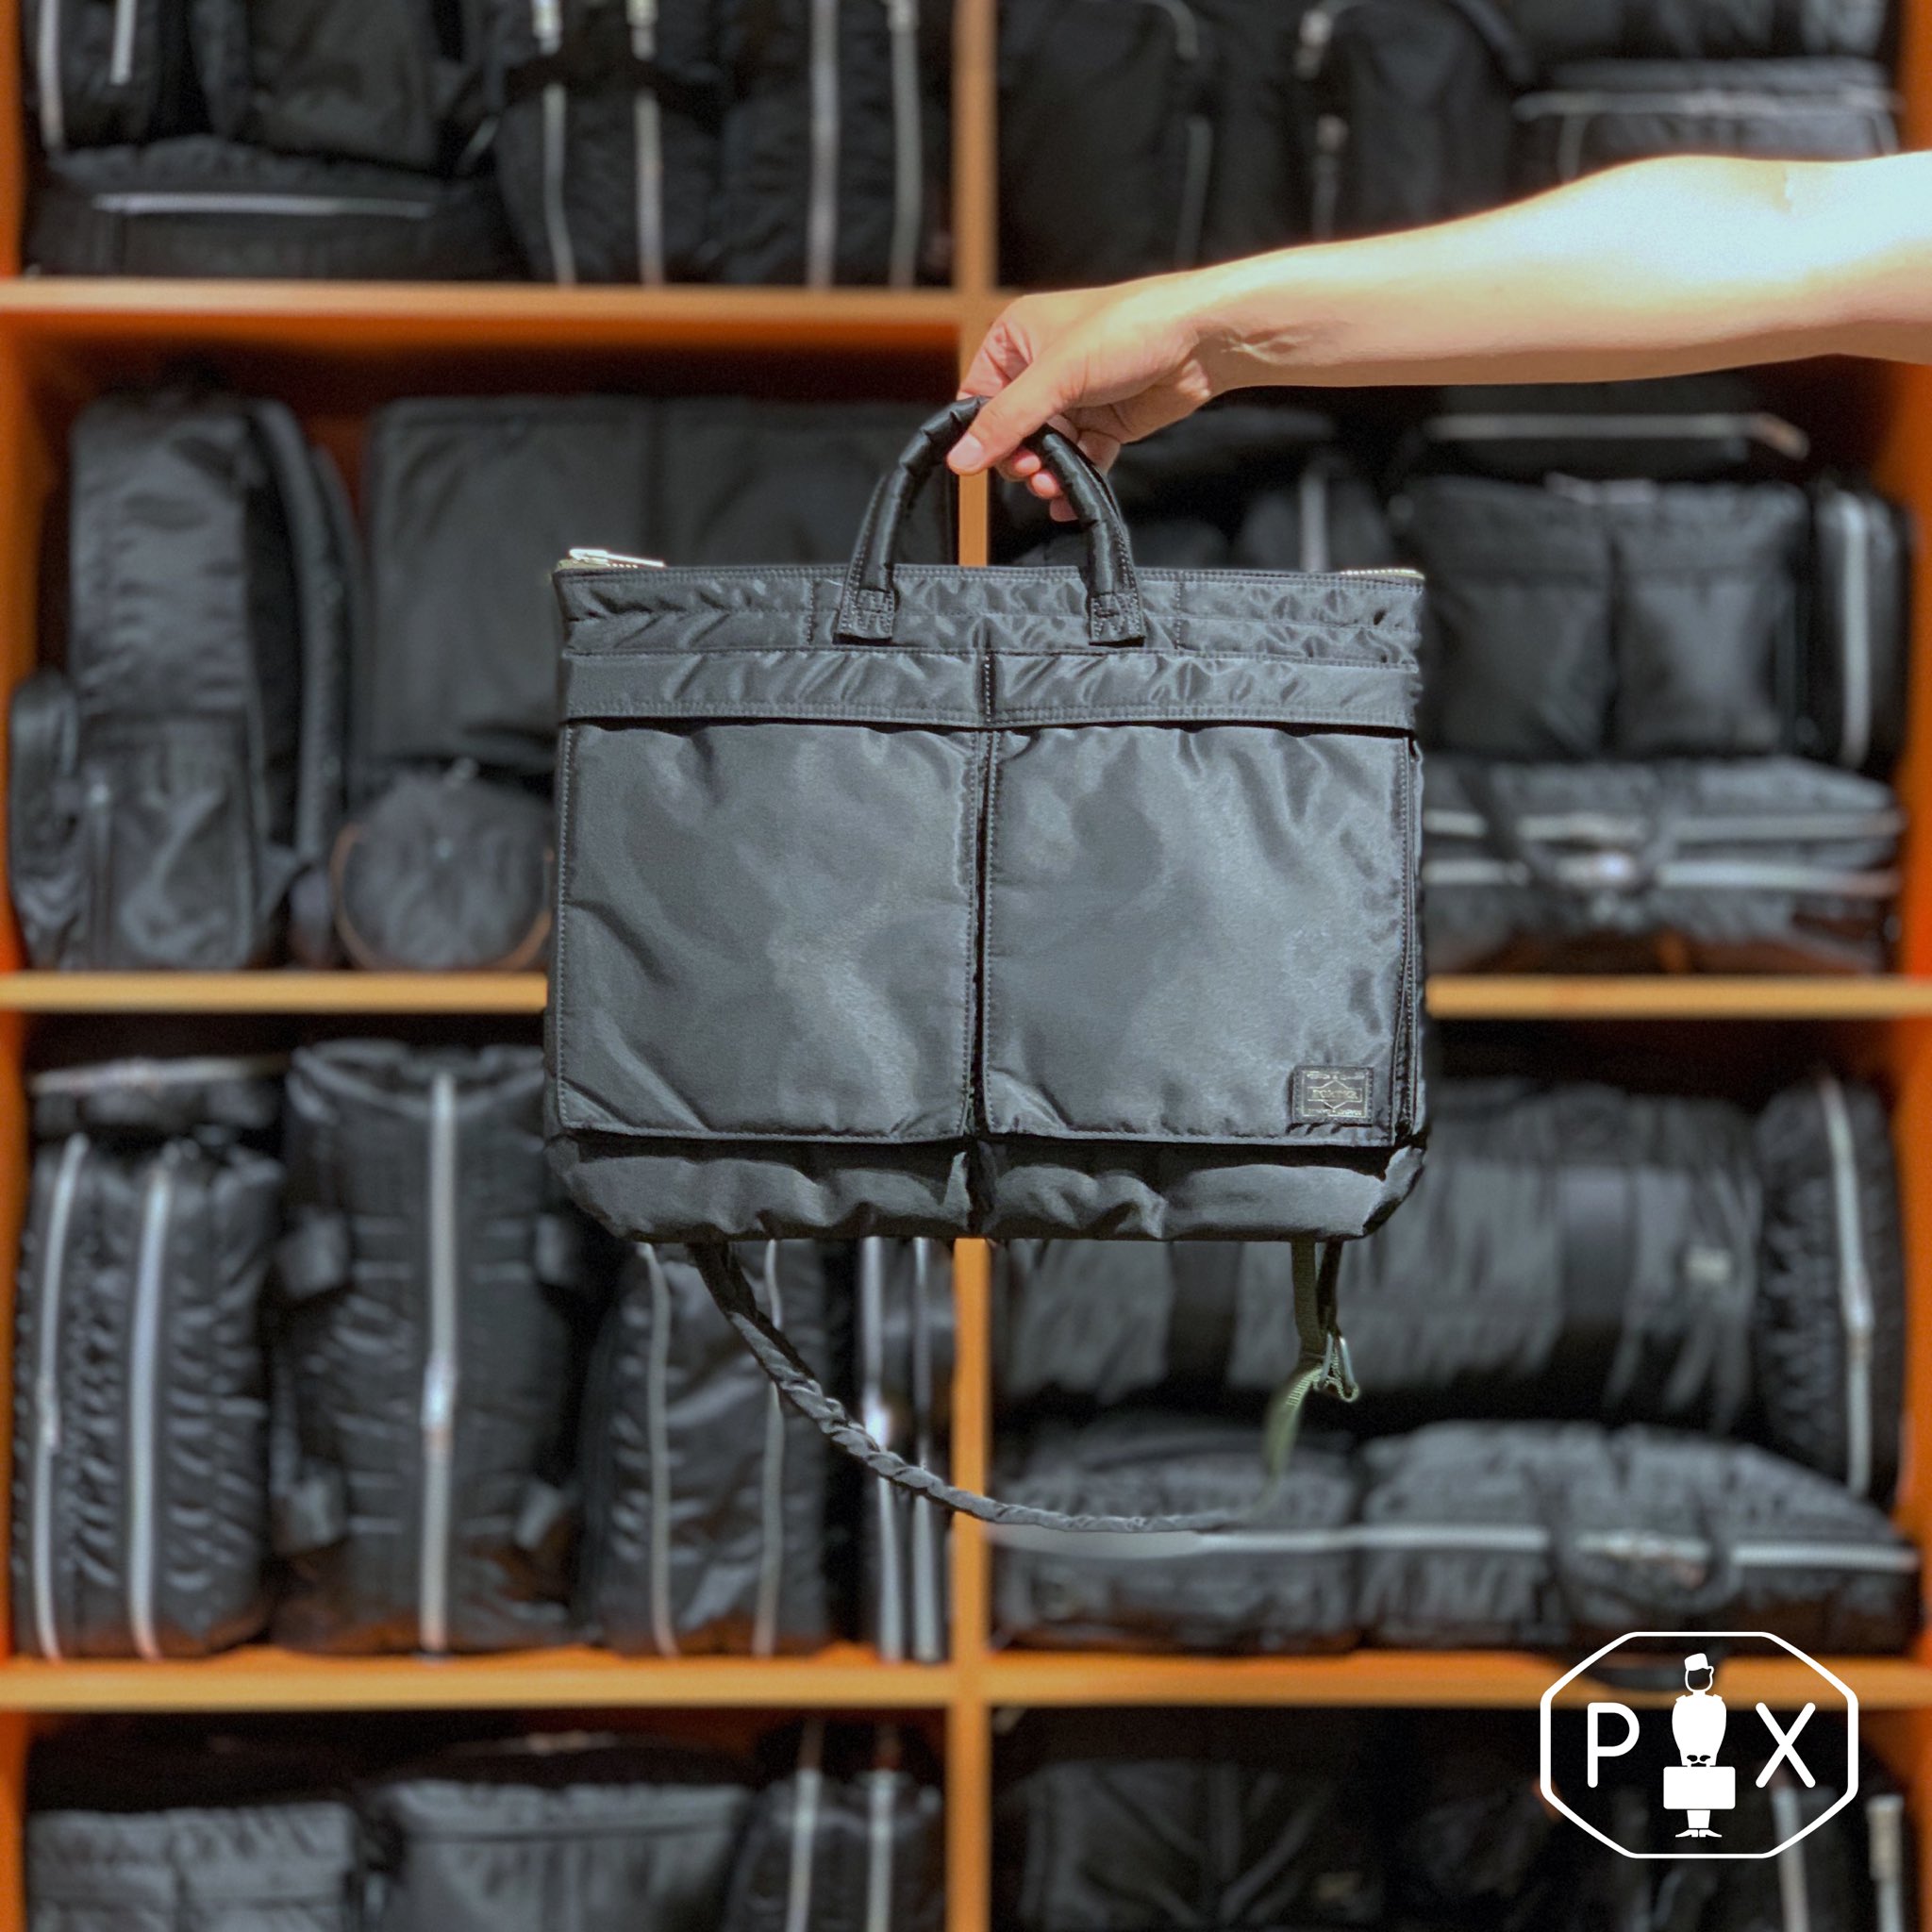 PORTER EXCHANGE on X: 【PX TANKER 4th COLLECTION】 “PX TANKER